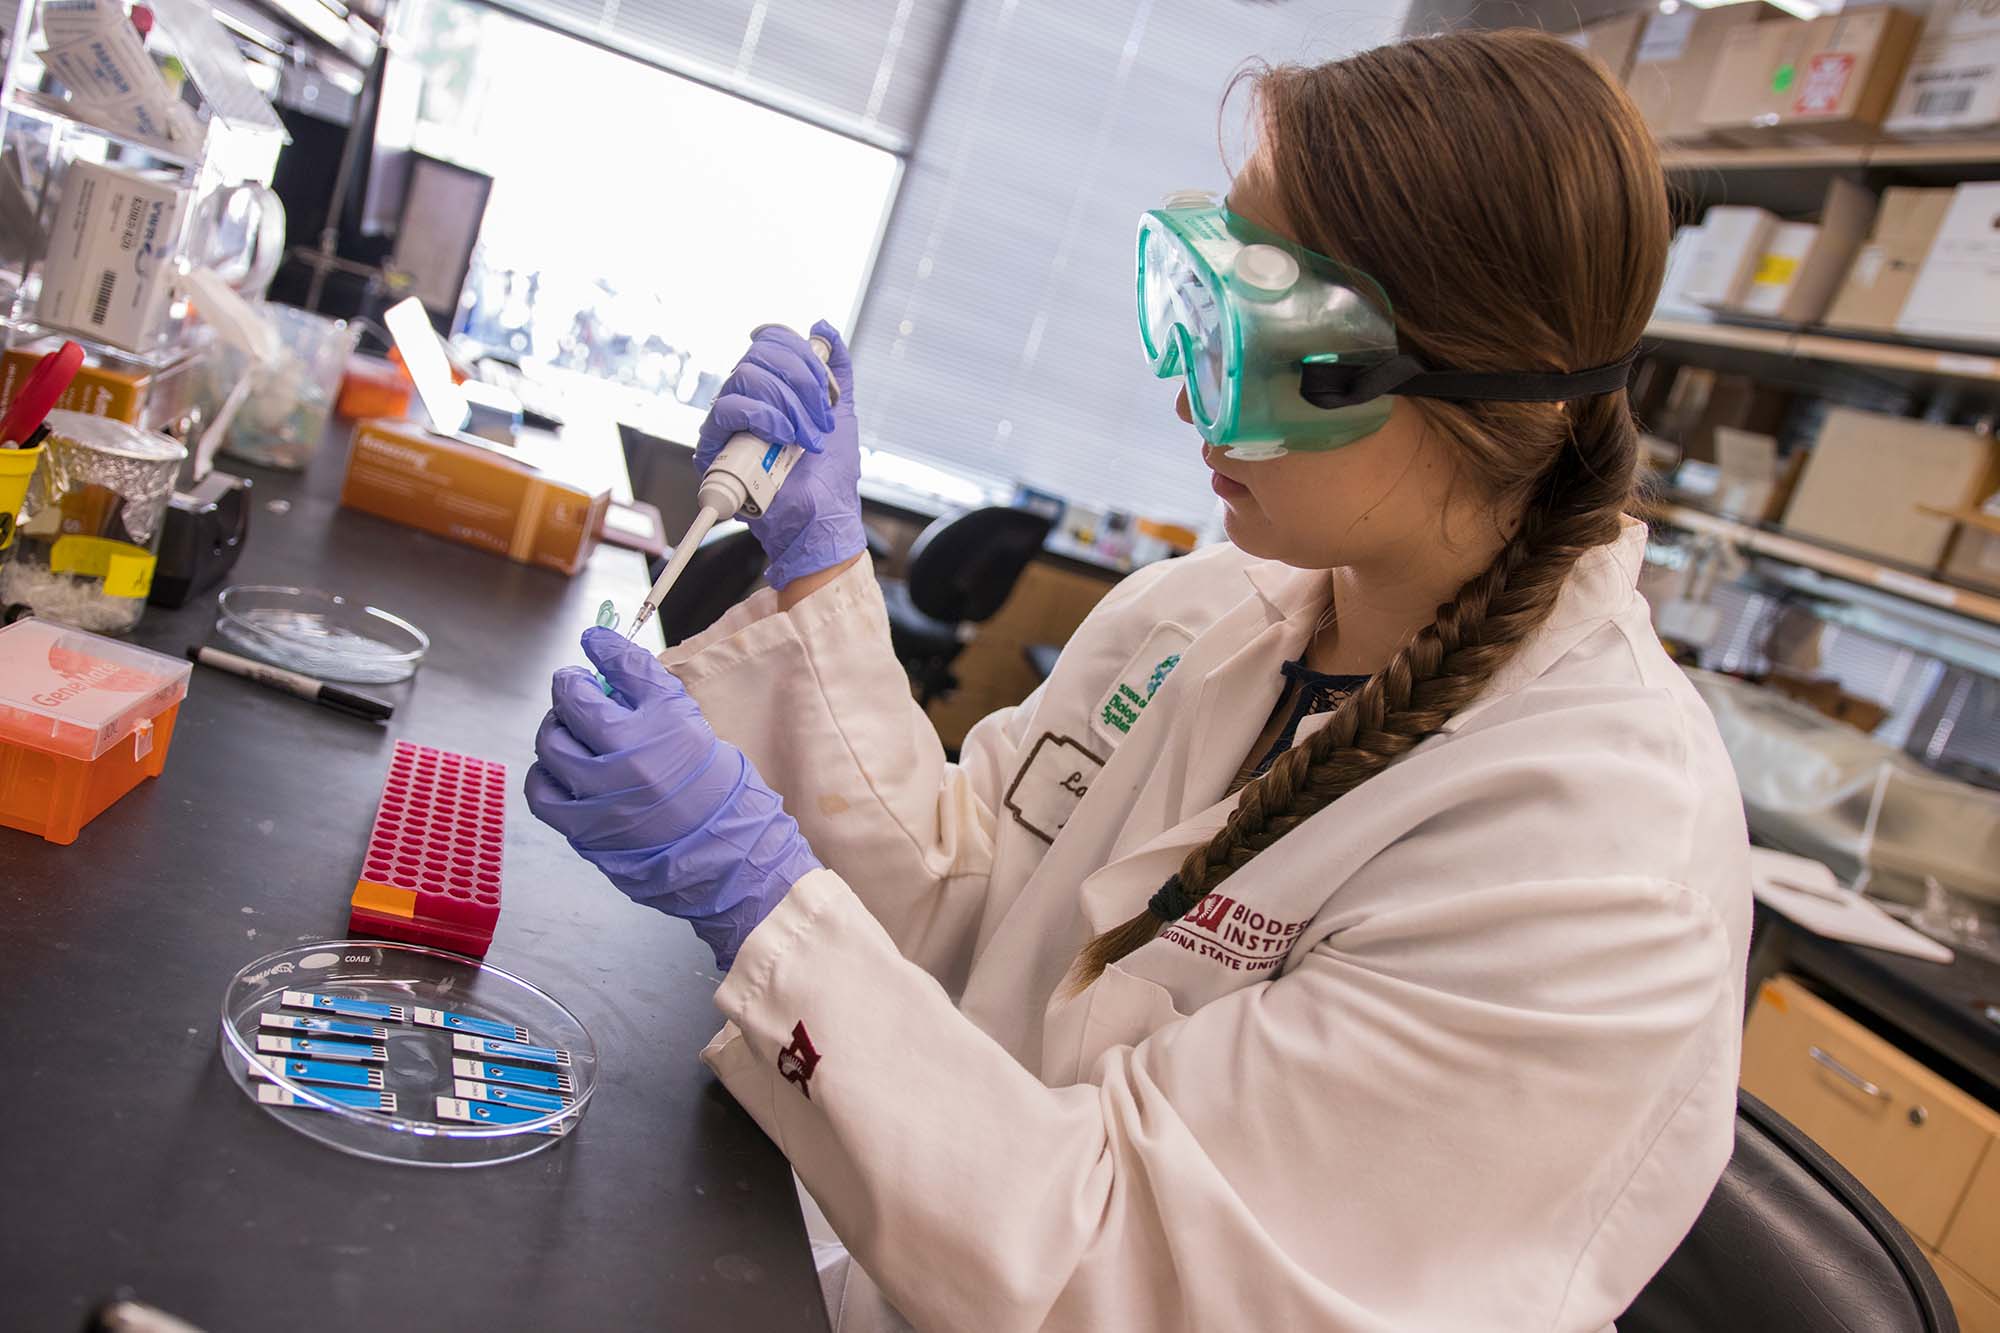 A female student wearing a lab coat and protective gear working on her research project at ASU research facilities.